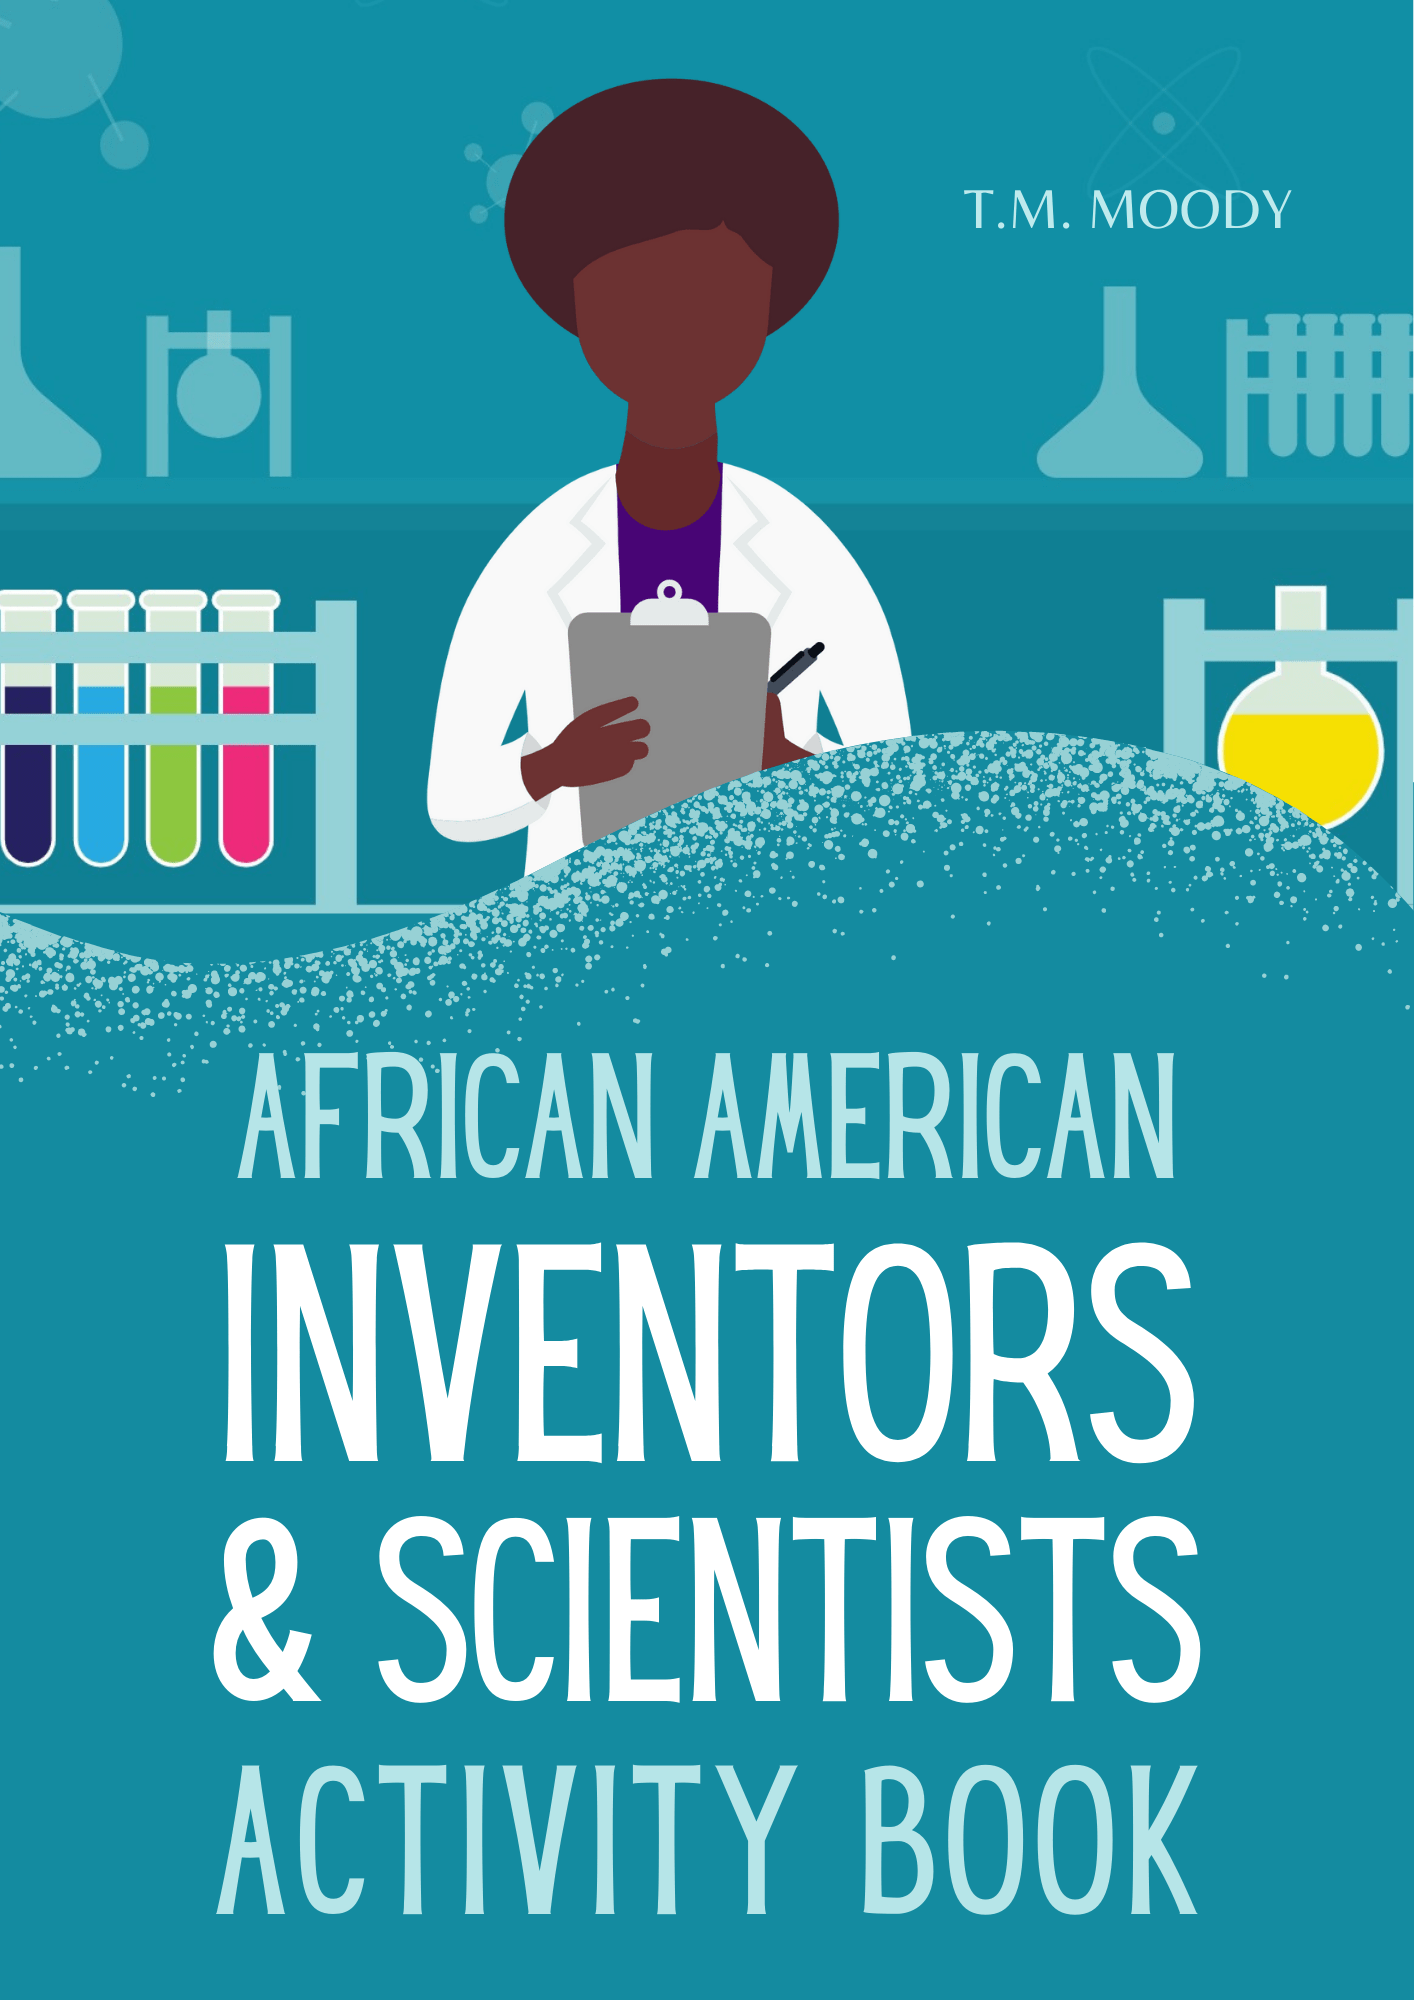 African American Inventors and Scientists Activity Book